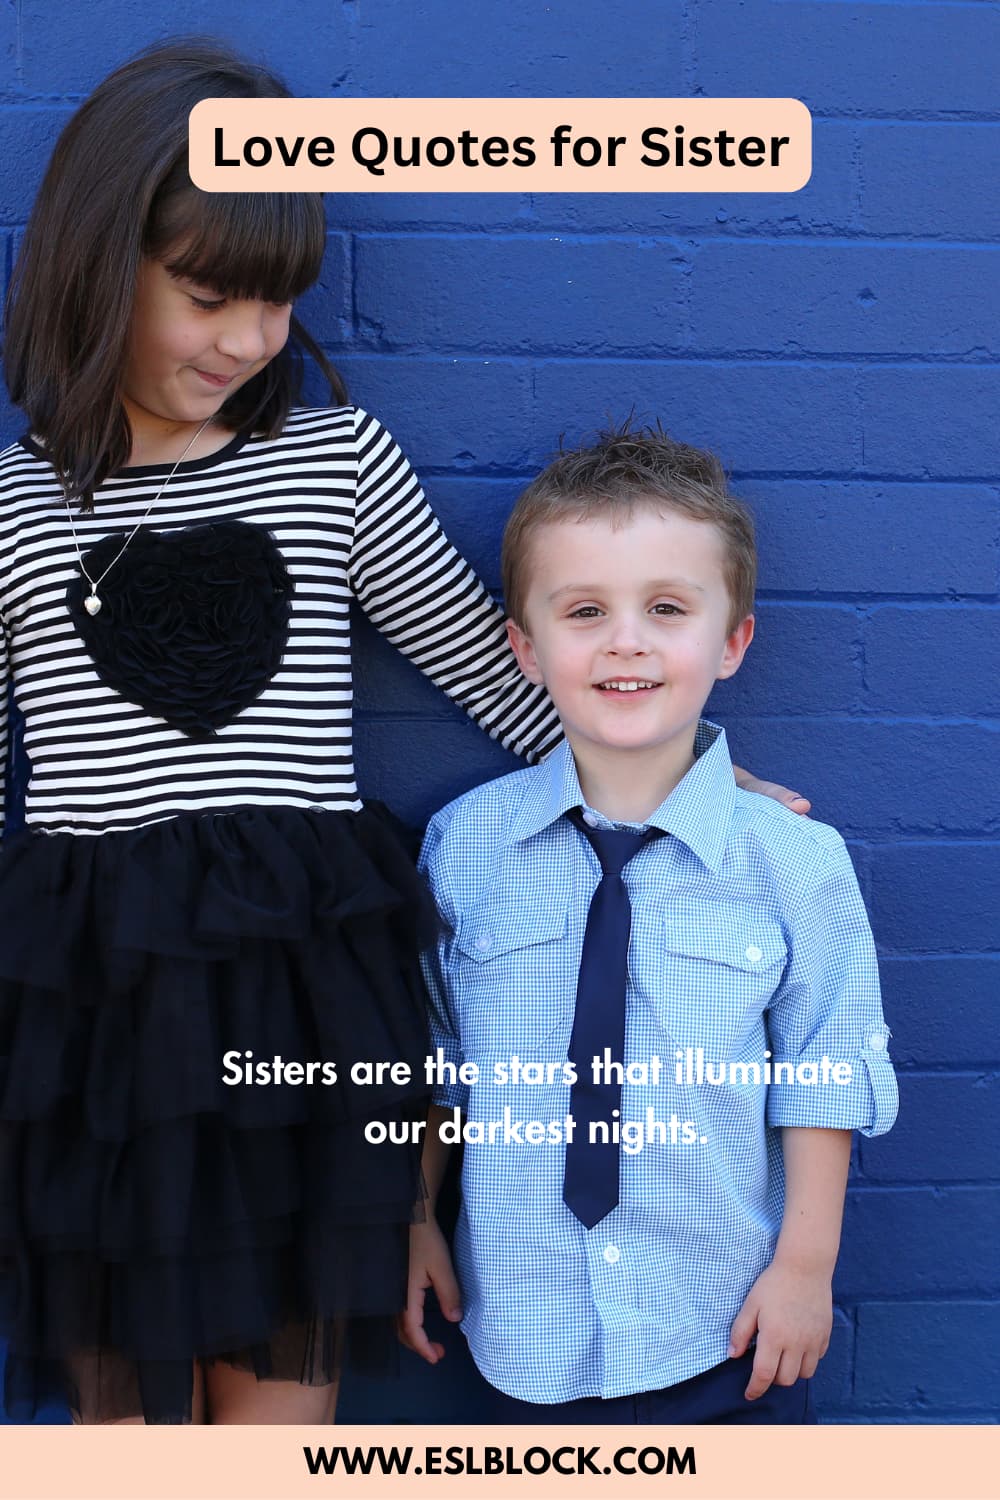 50 Love Quotes for Sister